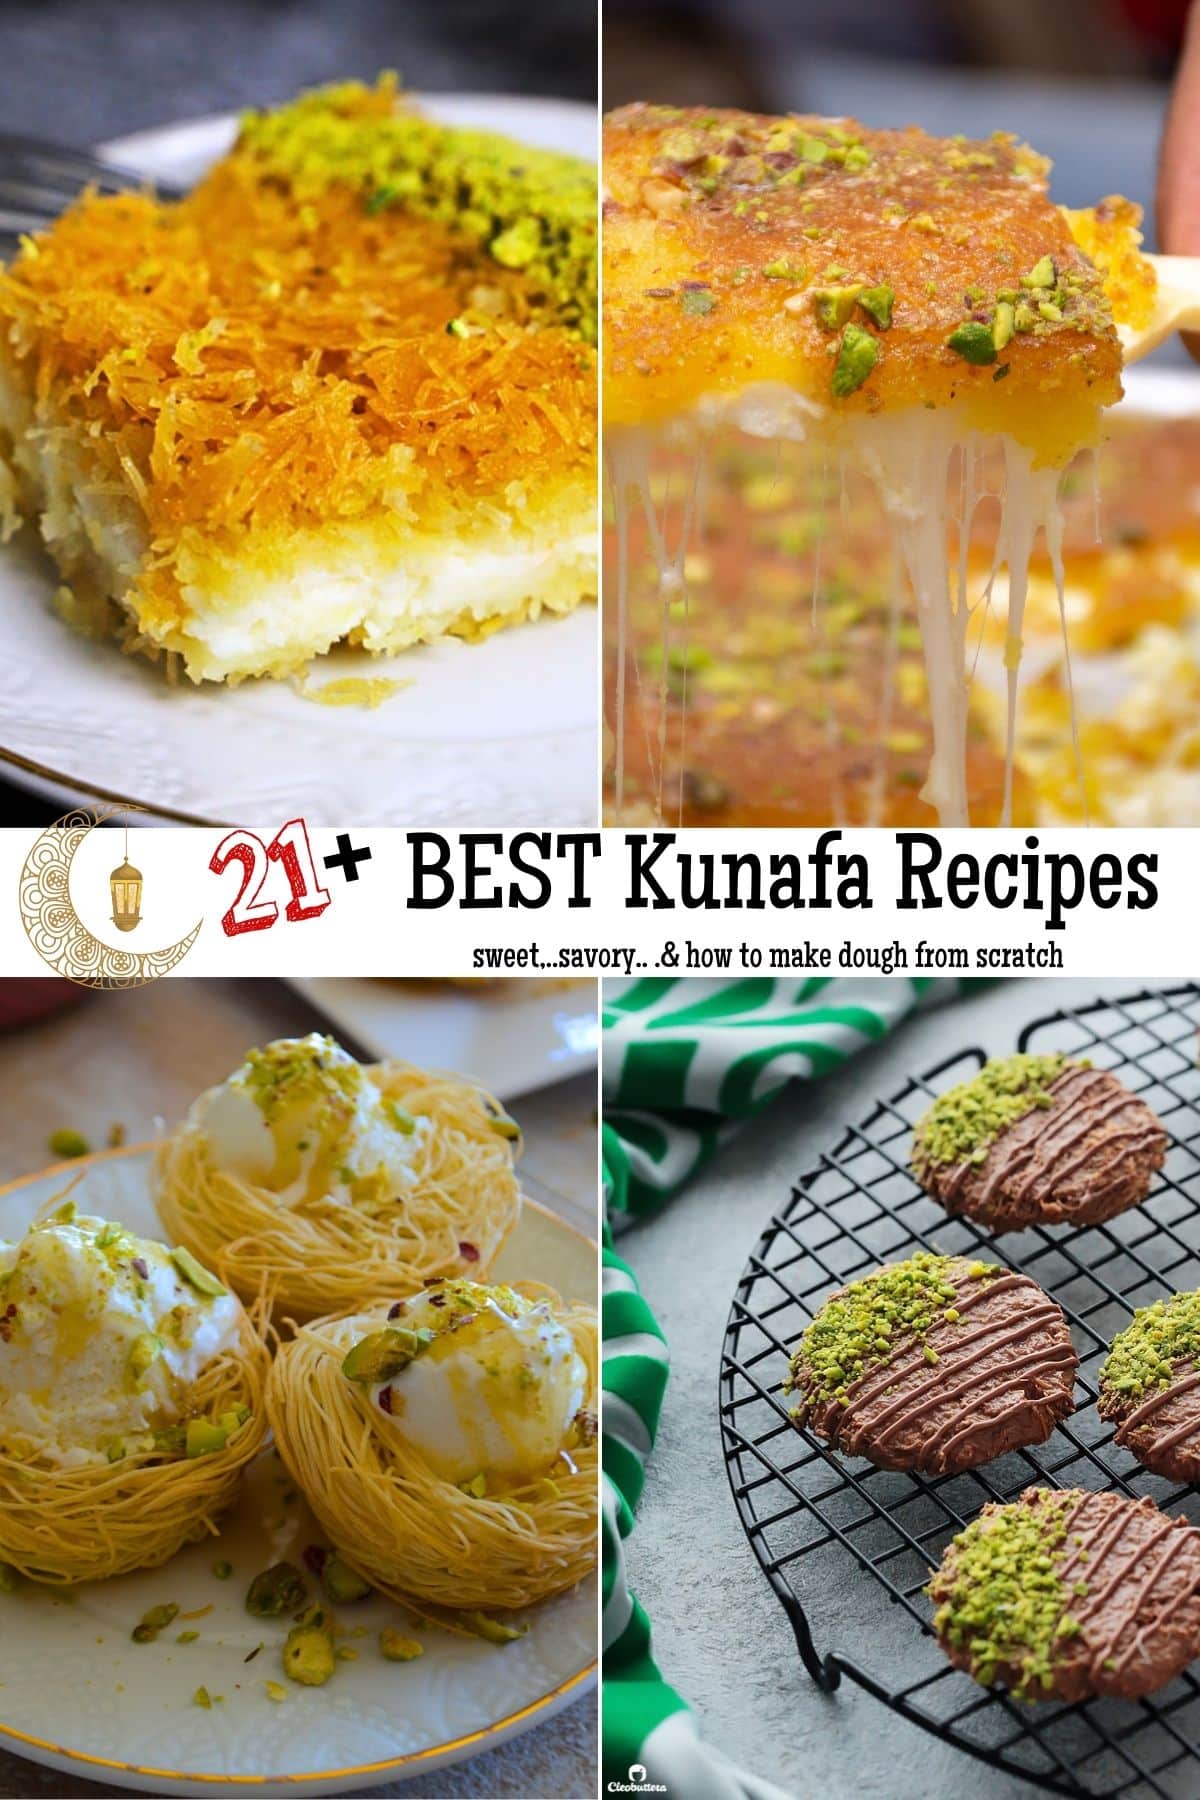 Image with text overlay for kunafa recipes.